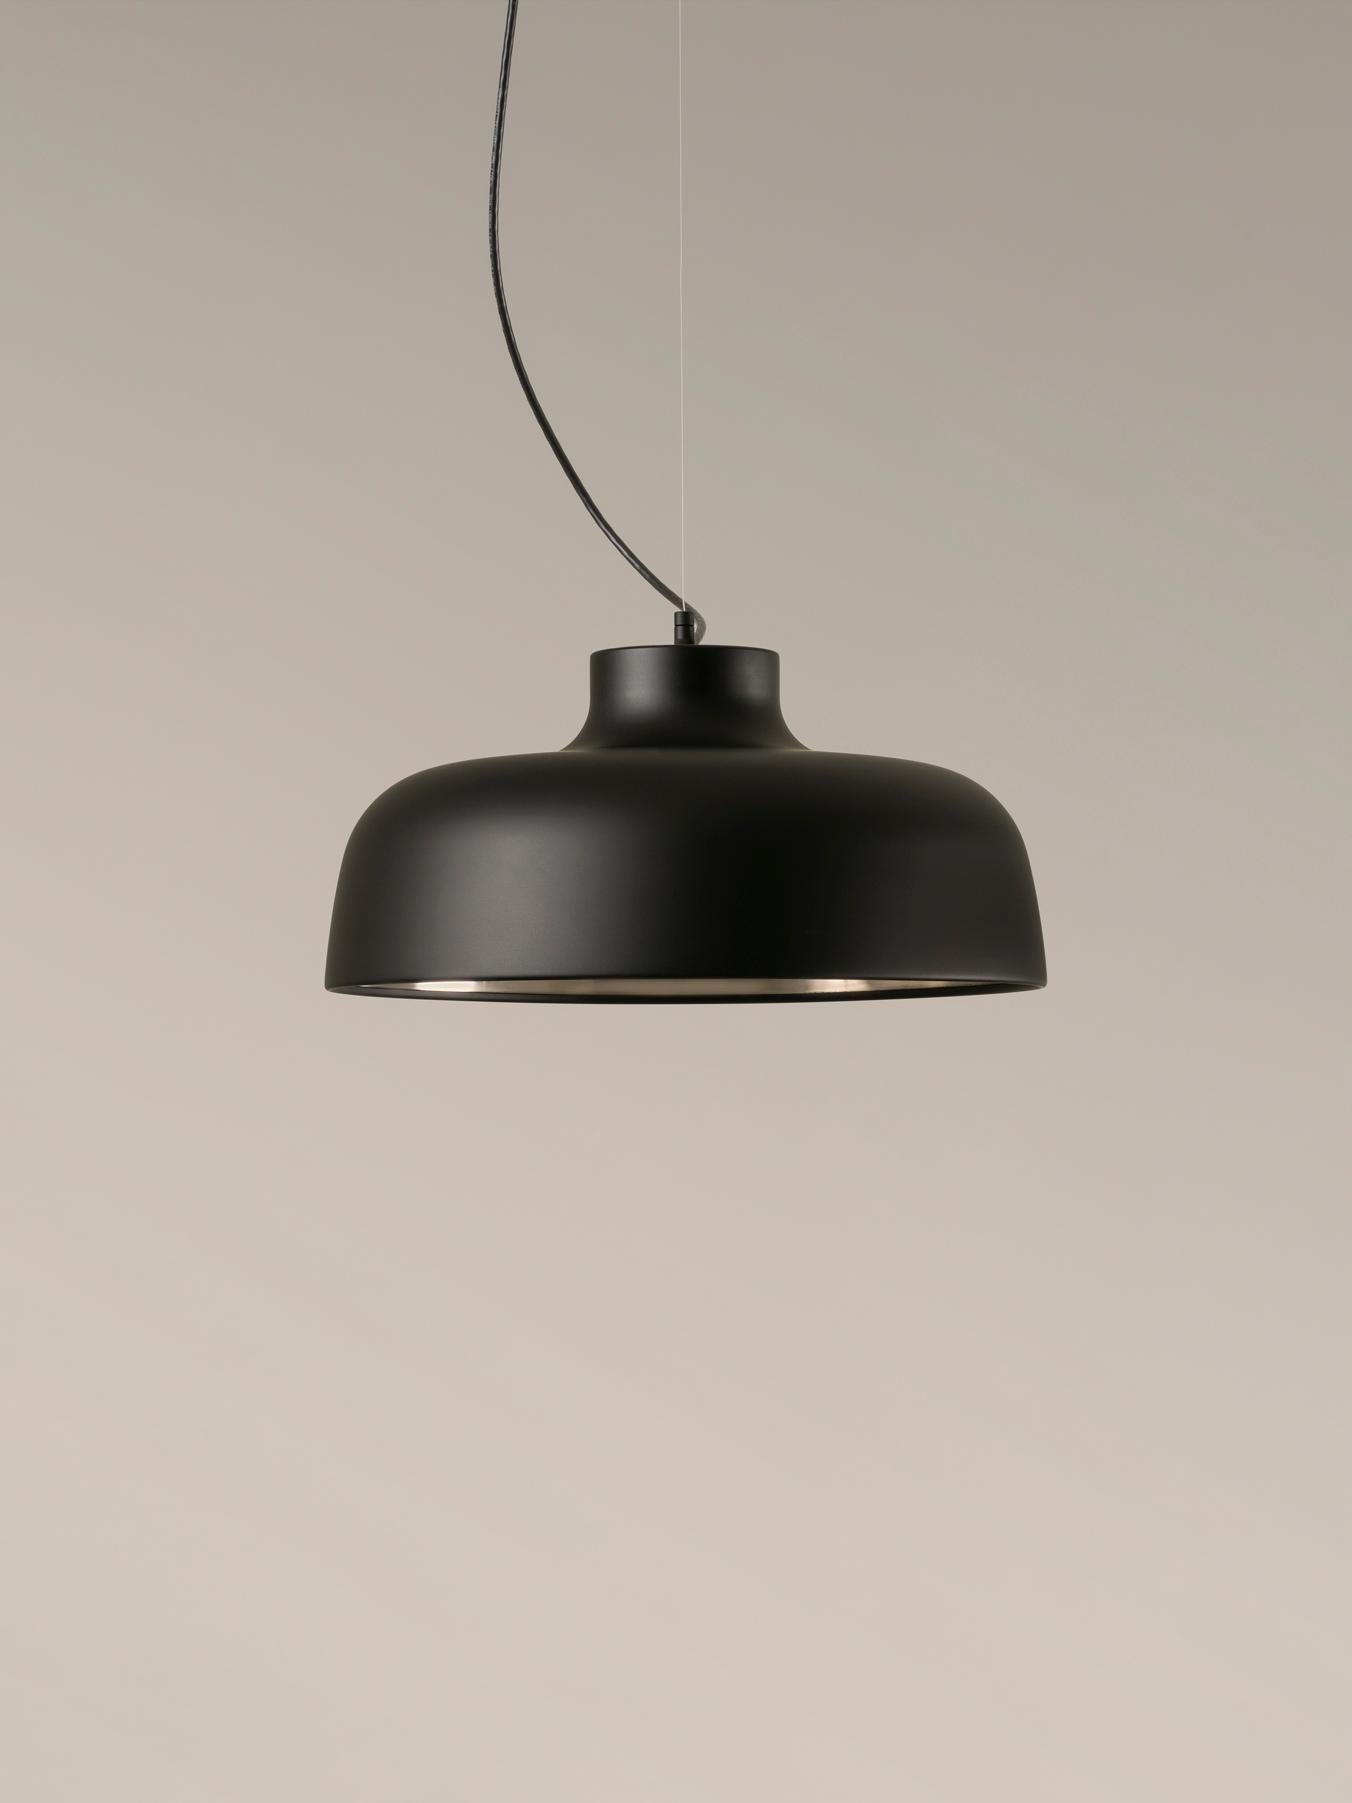 Black M68 pendant lamp by Miguel Milá
Dimensions: D 46 x H 22 cm
Materials: Aluminum.
Available in other colors.

The redolent shades of M68, in vibrant red, white or matt black, as well as polished aluminium, were inspired by the shape of a